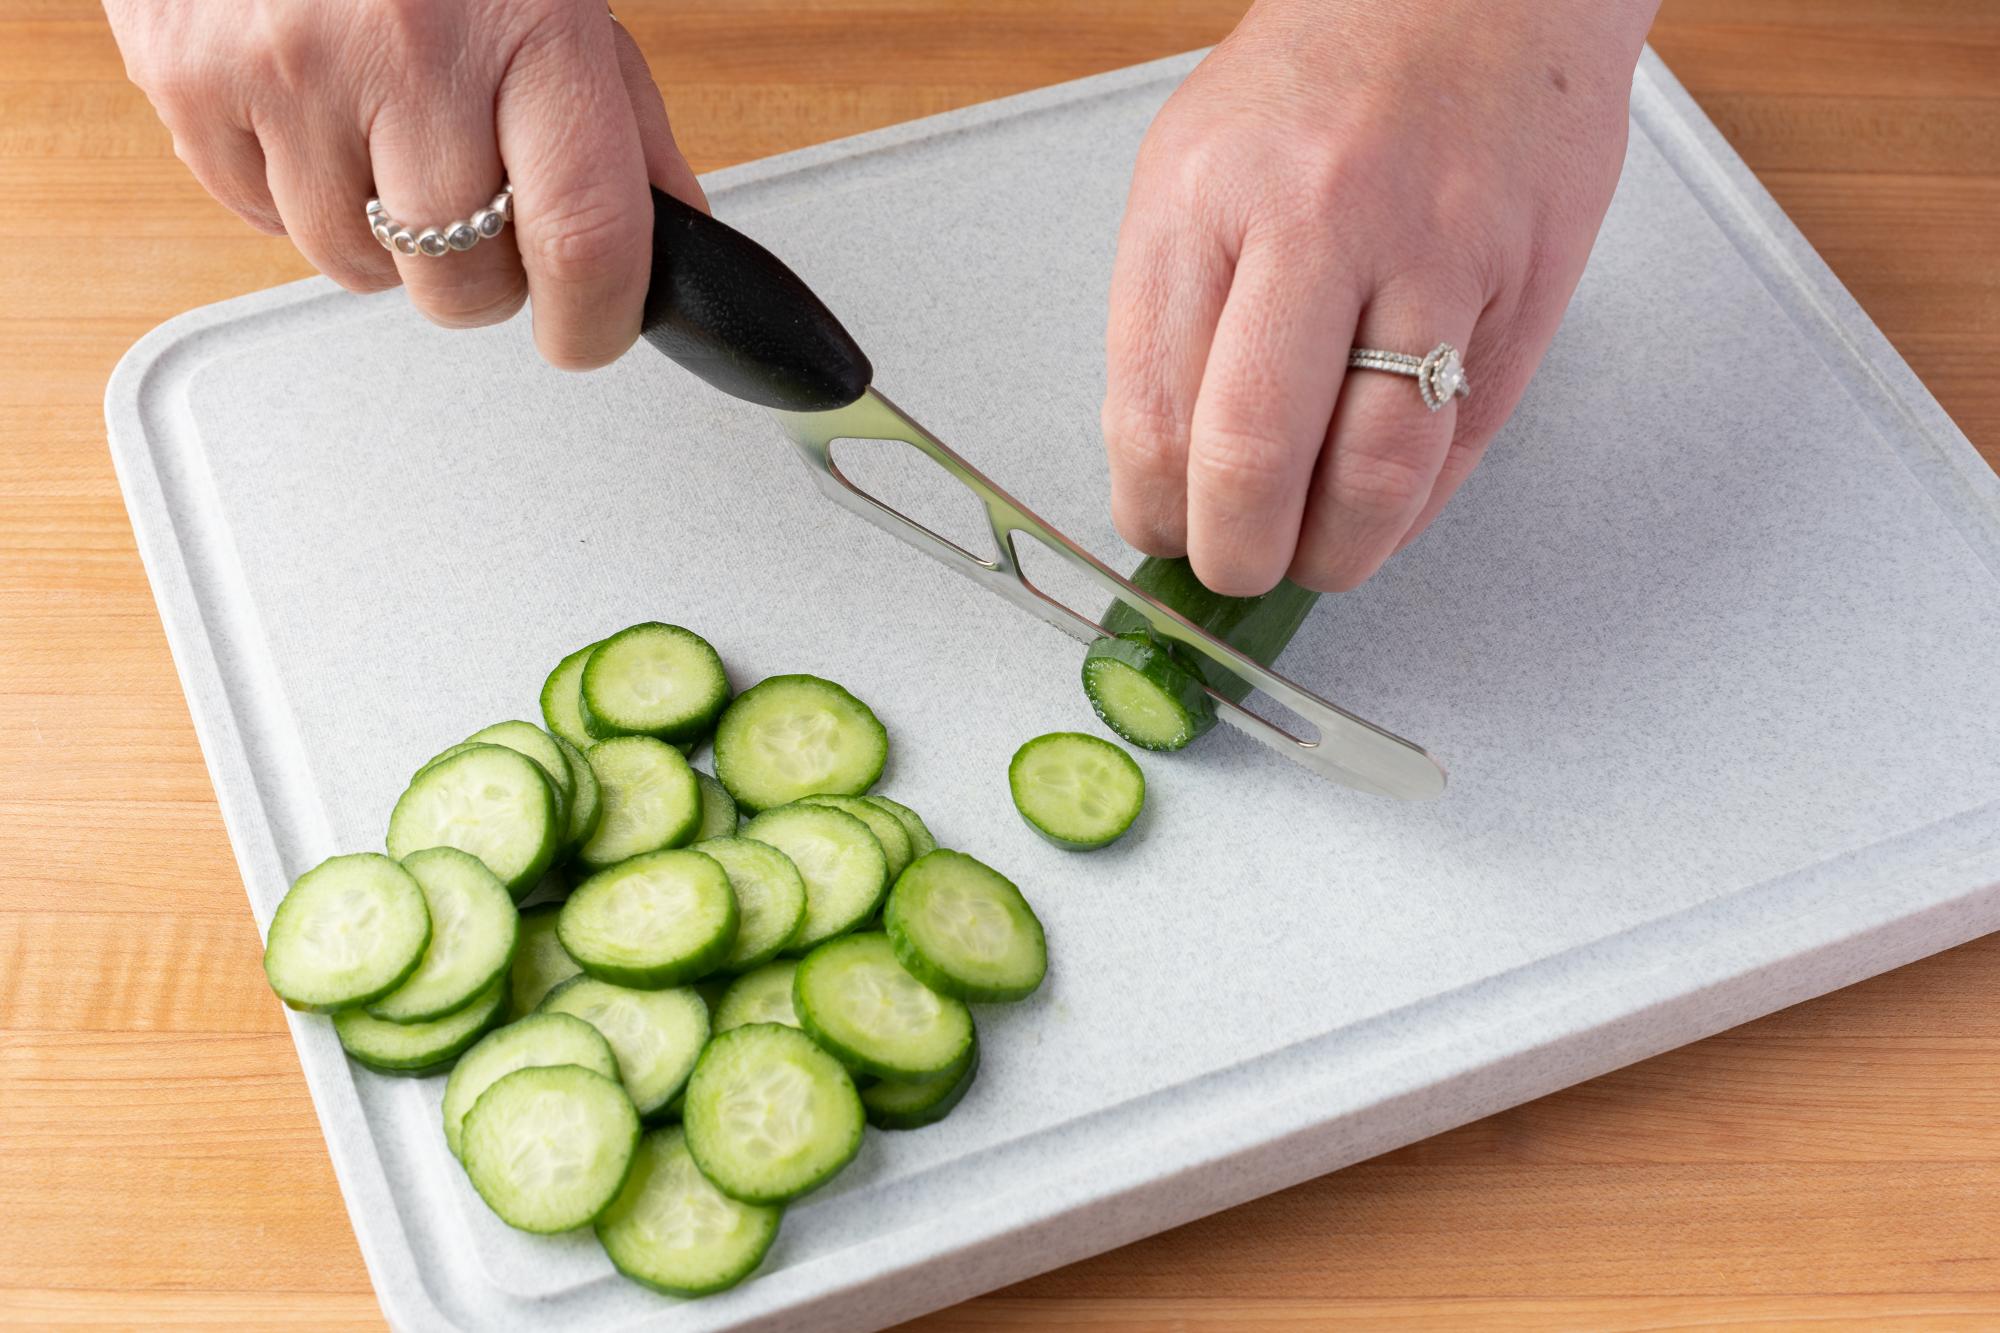 Slicing cucumber with a Cheese Knife.